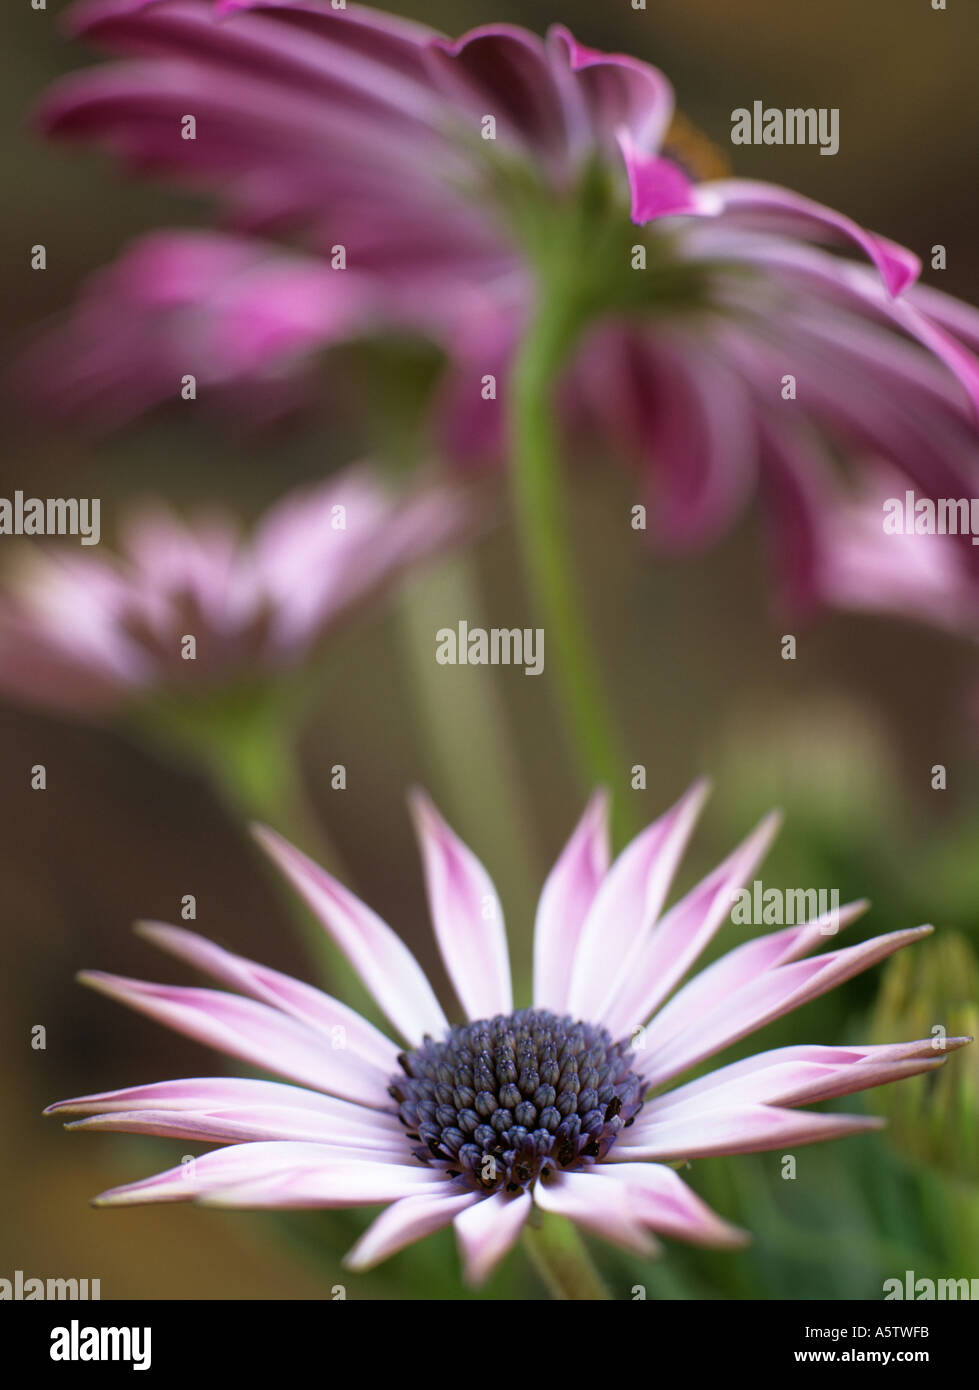 OSTEOSPERMUM SILVIA or African Daisy differentially focused on centre of pink and white flower with other flowers out of focus Stock Photo